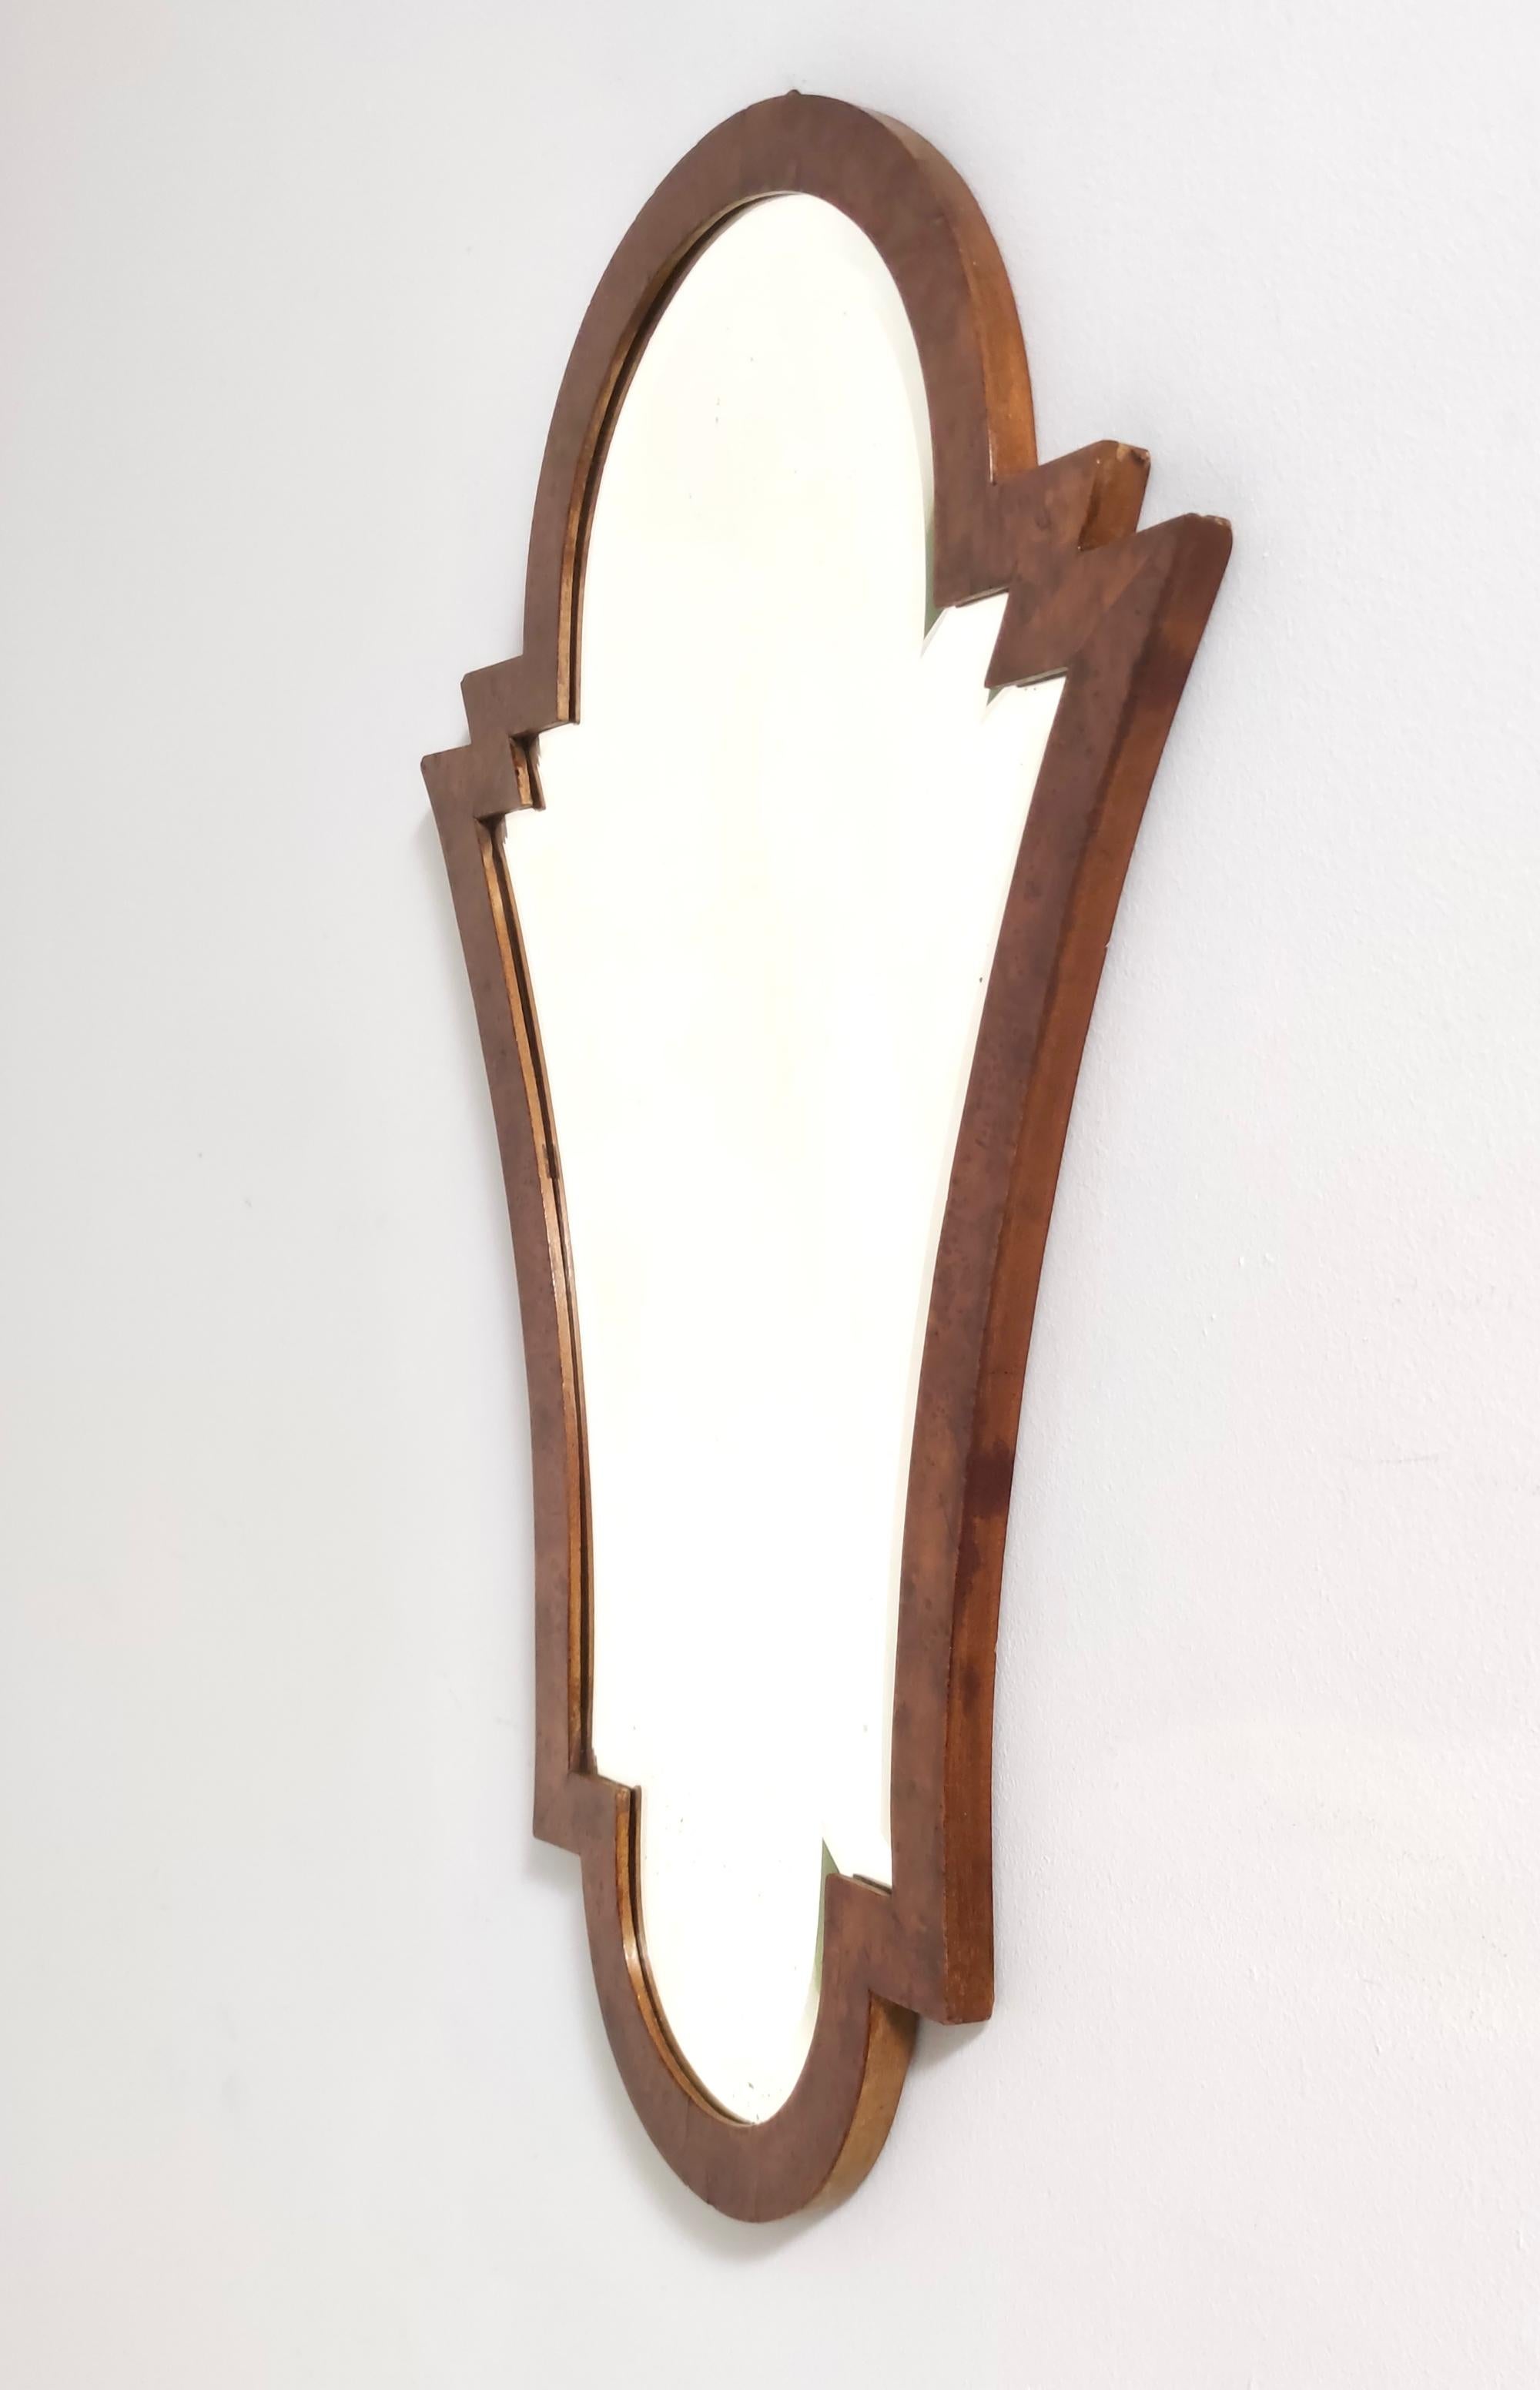 Vintage Art Deco Shield Shaped Beveled Wall Mirror with Walnut Frame, Italy In Excellent Condition For Sale In Bresso, Lombardy